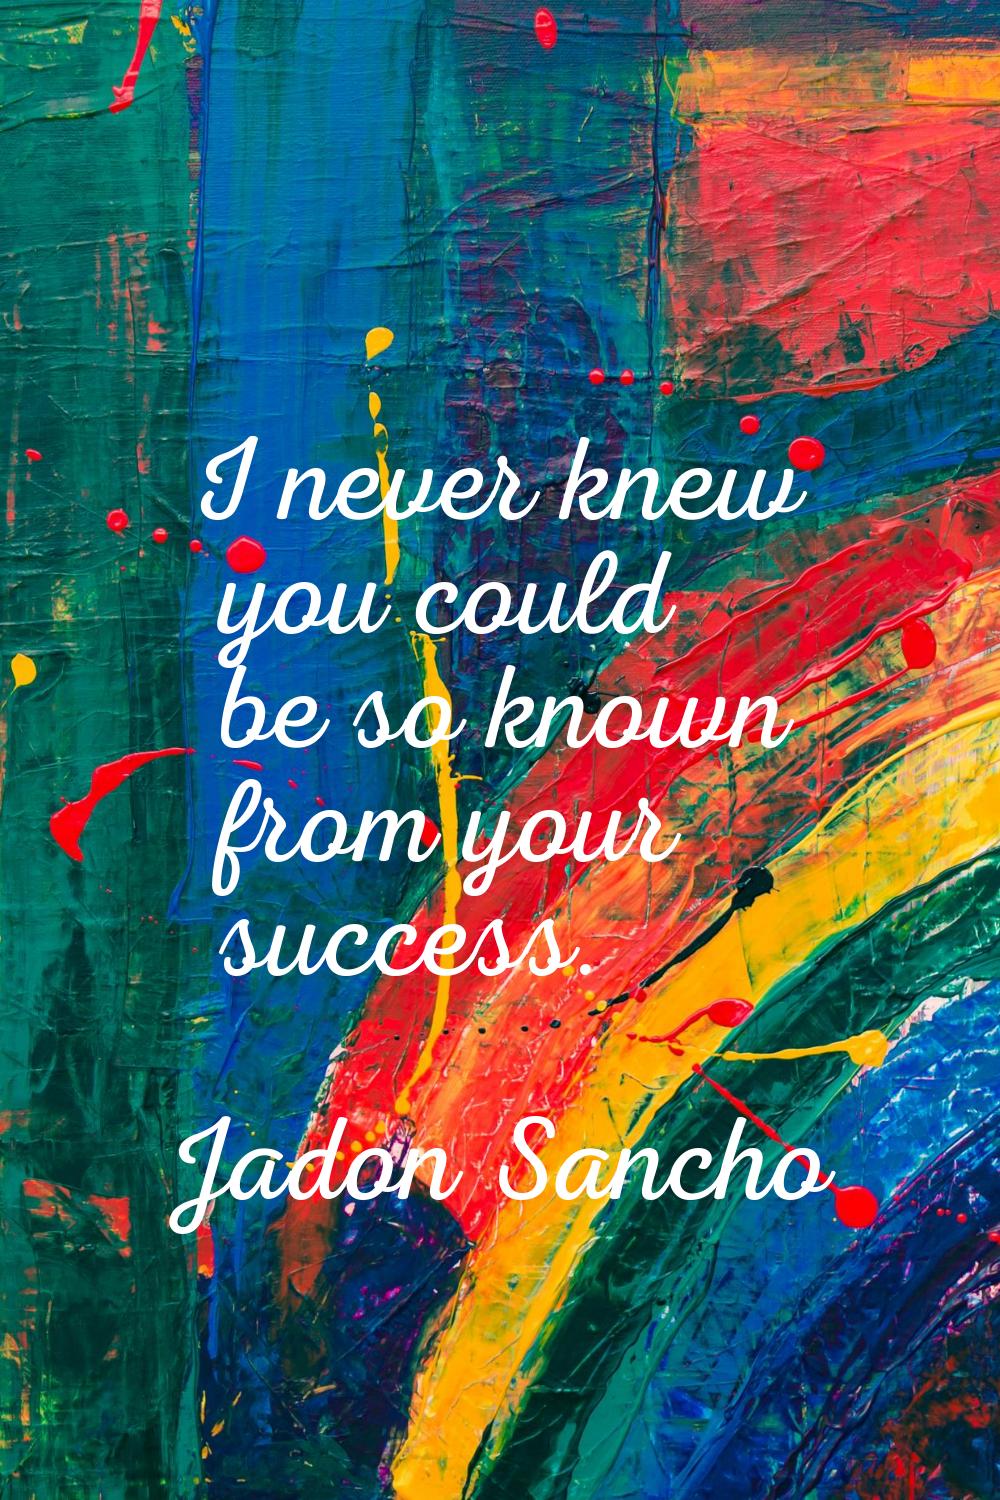 I never knew you could be so known from your success.